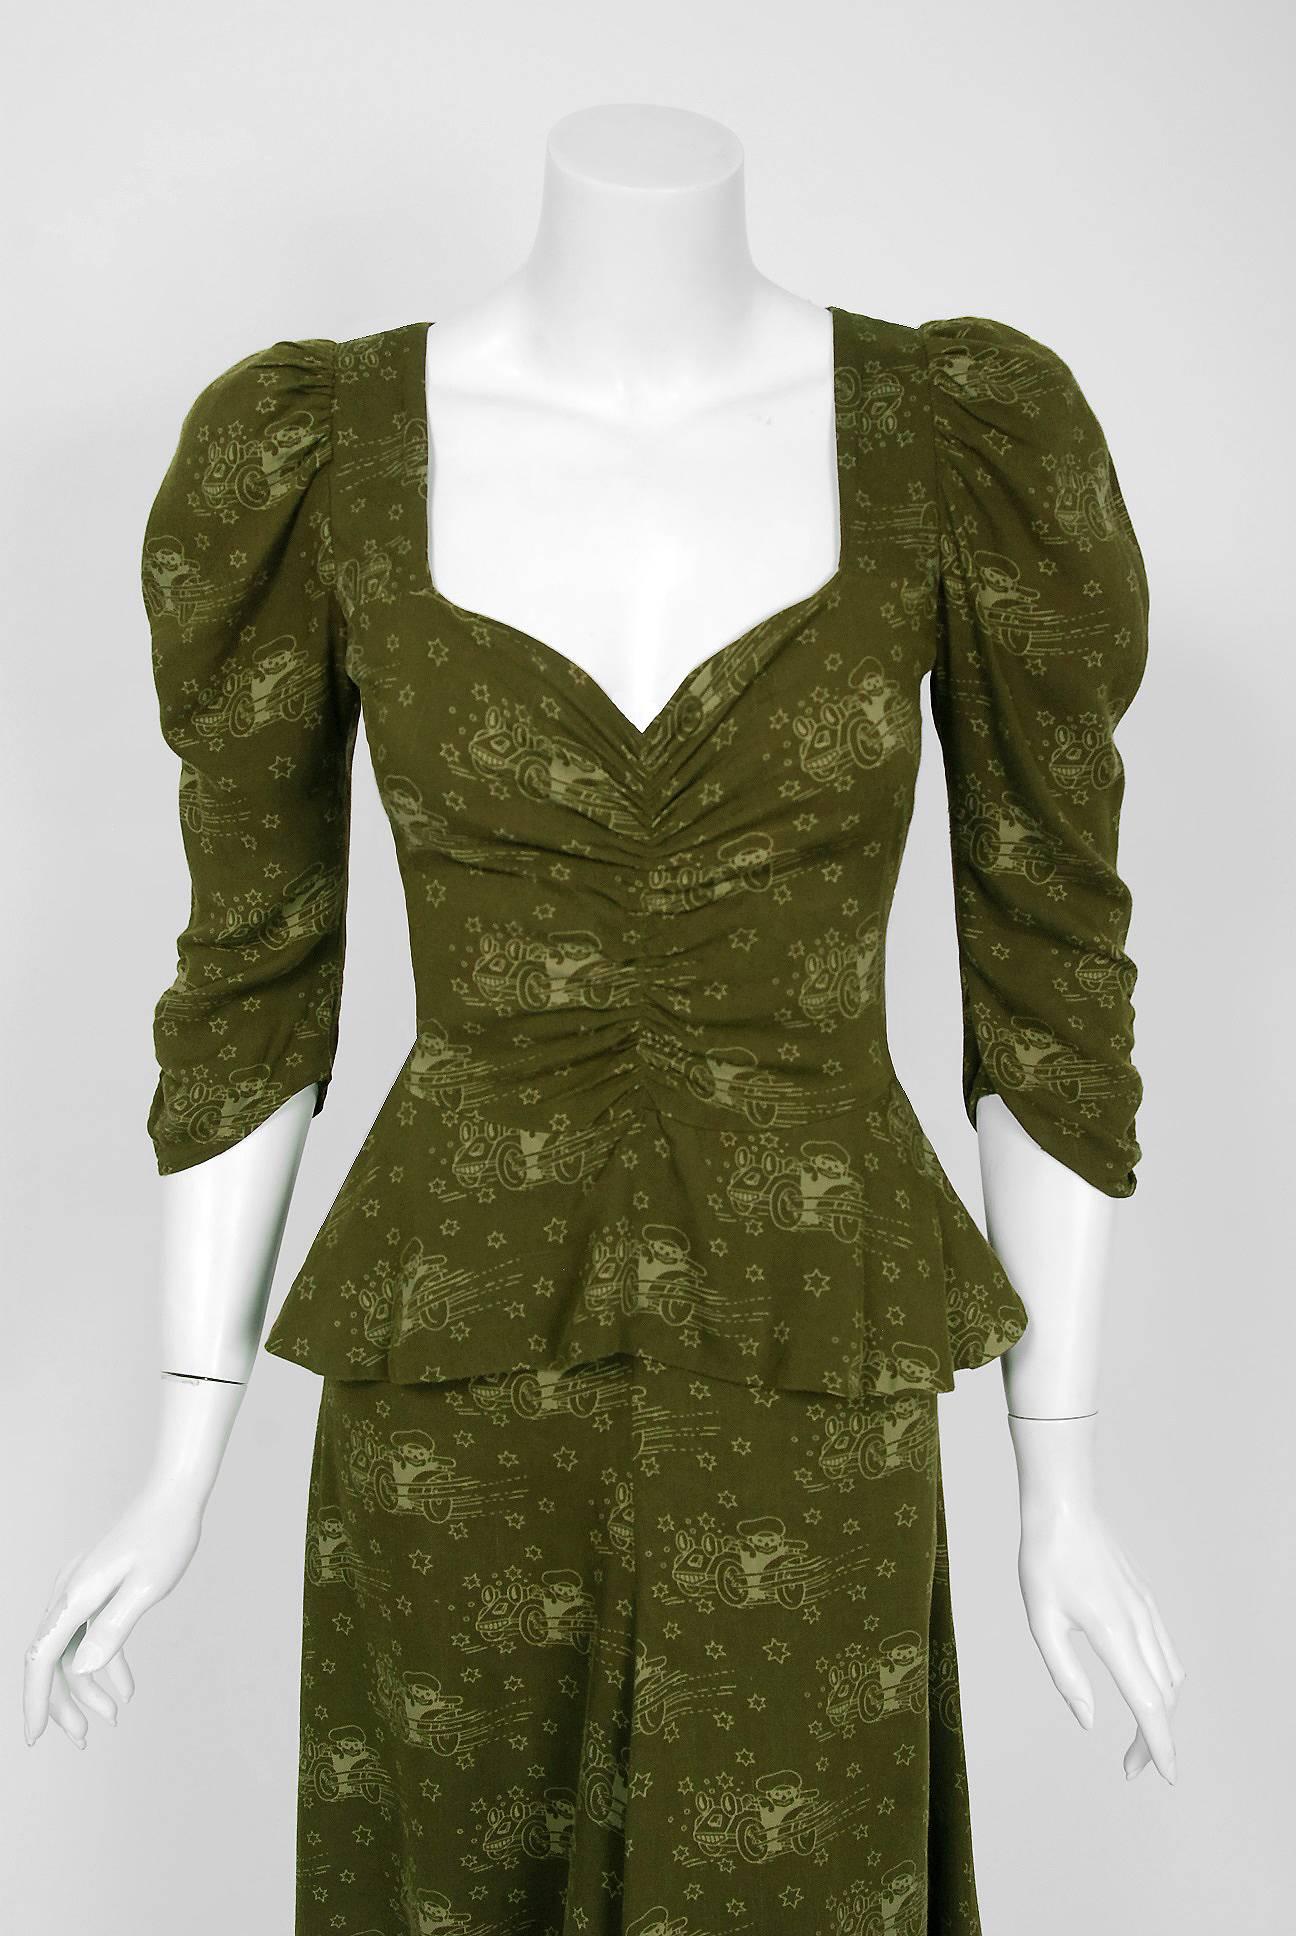 If you were an “It Girl” in London during the 1960's and 1970's, Biba is where you would have shopped. This sensational olive green novelty clown-car print dress is a perfect example of the brand's genius. It is a soft knit-wool with all the classic